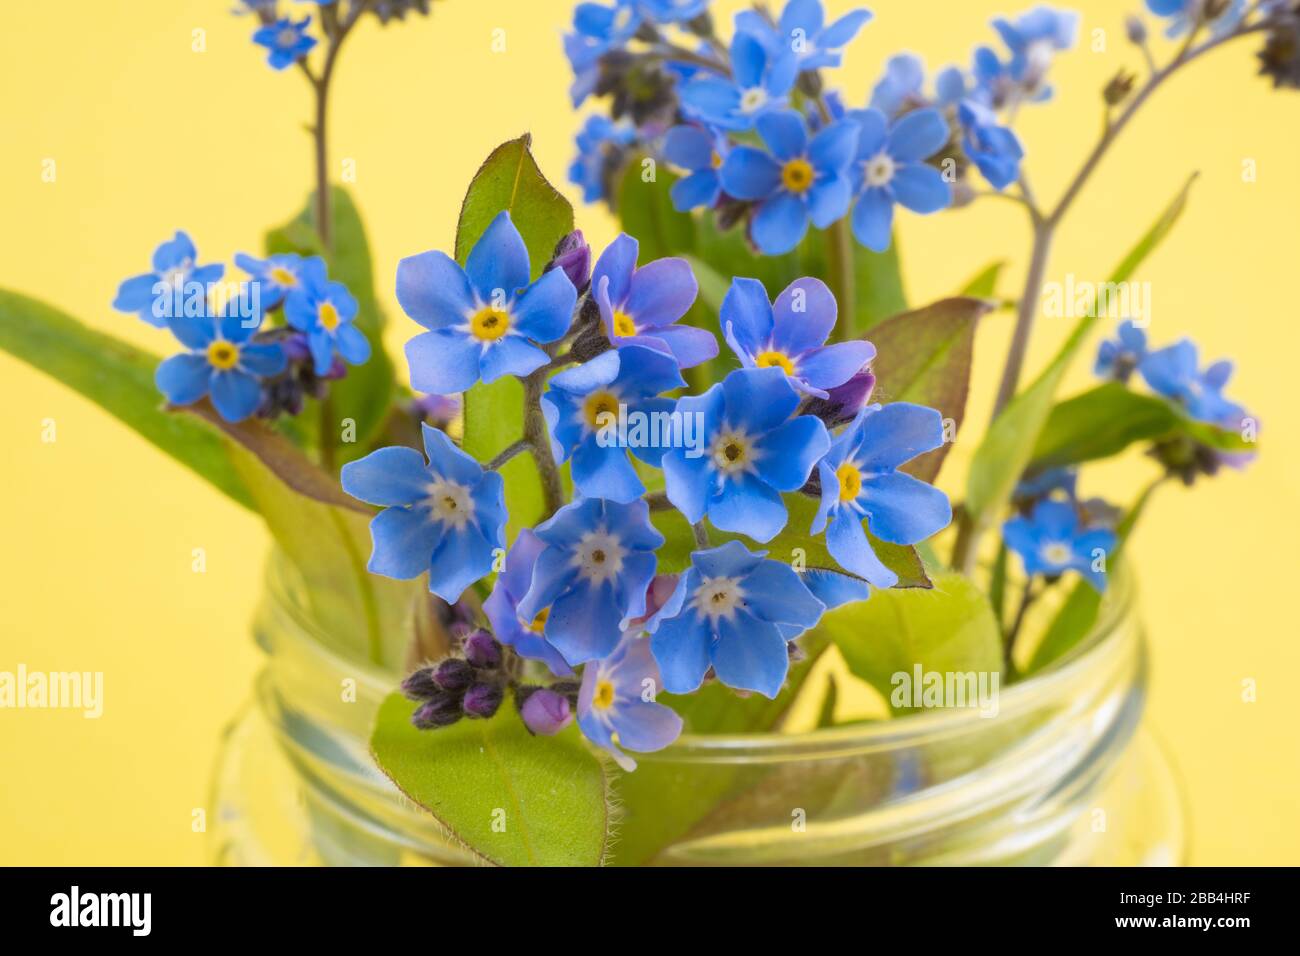 A jar of forget-me-nots or Scorpion grass, an image taken using a macro lens at rugfoot studios. Photo date: Monday, March 30, 2020. Photo: Roger Garf Stock Photo